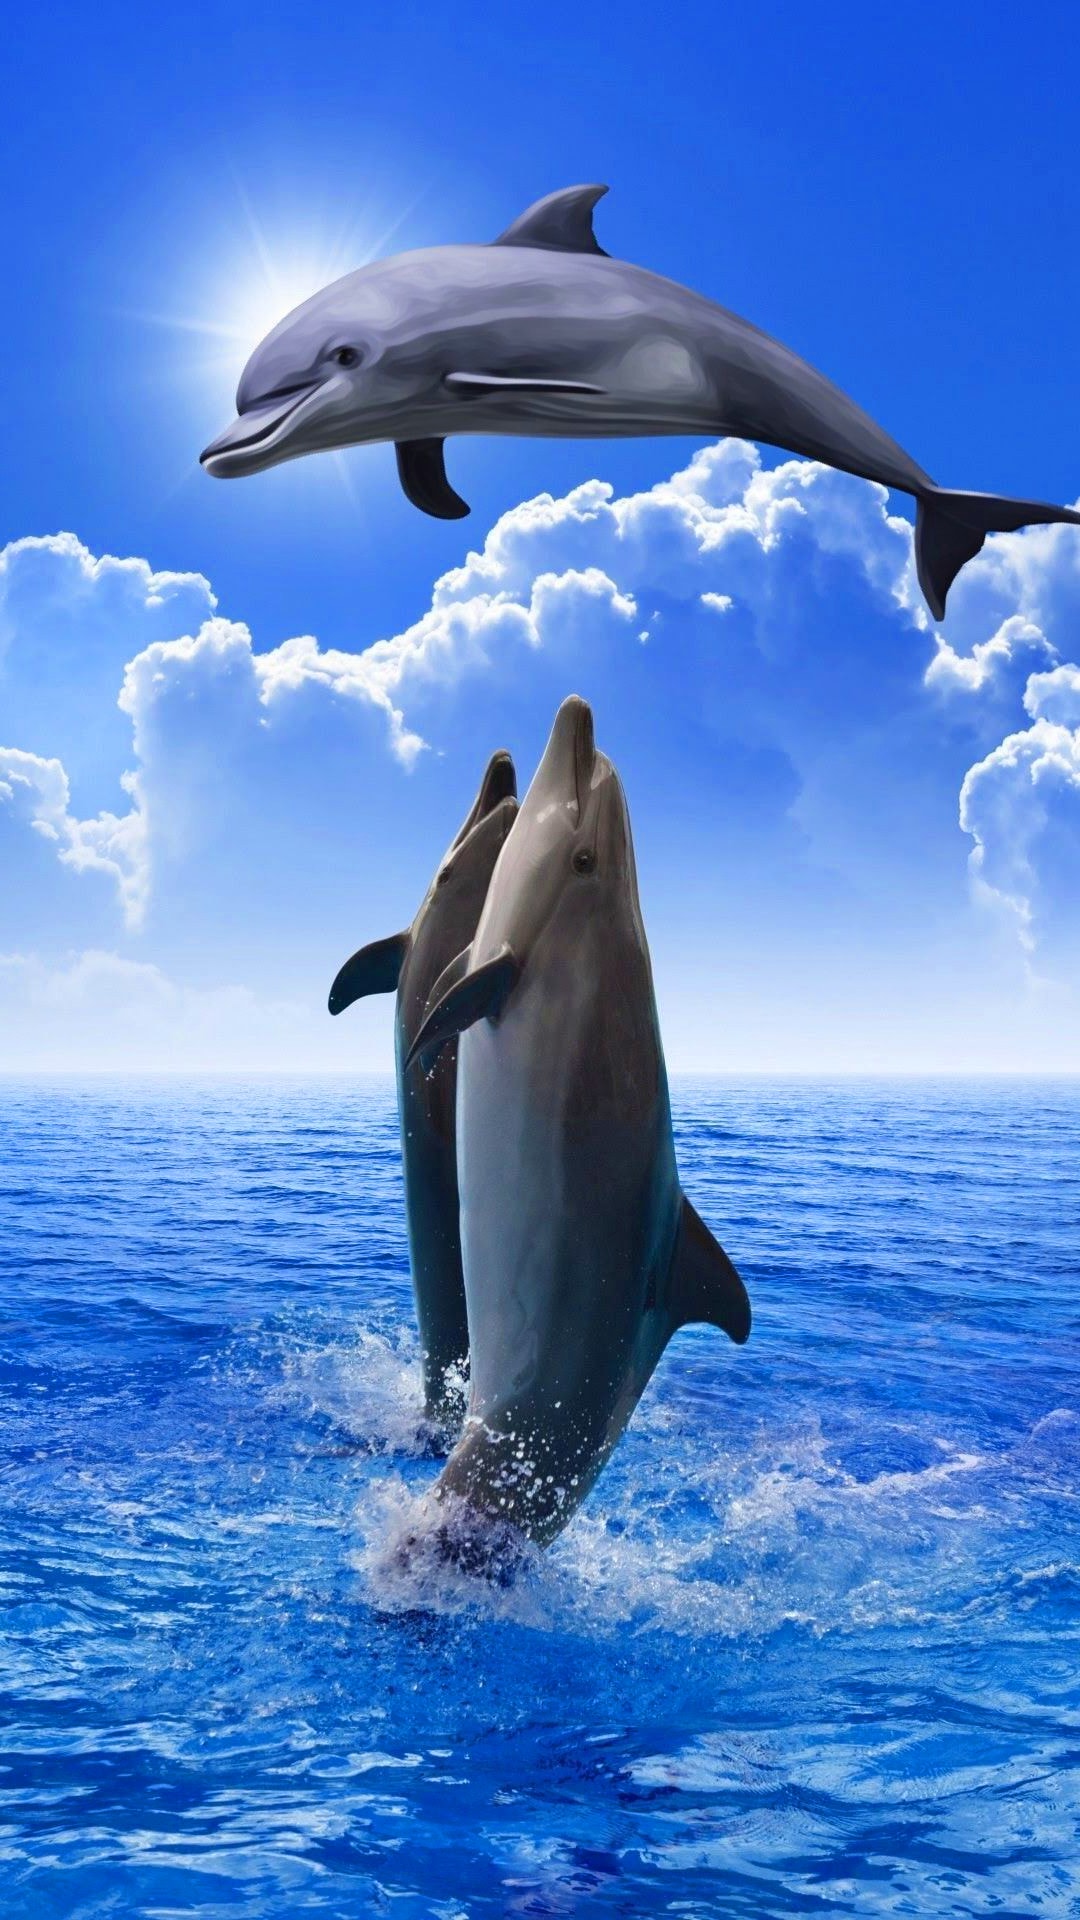 Dolphin Wallpapers APK 40dolphin for Android  Download Dolphin Wallpapers  XAPK APK Bundle Latest Version from APKFabcom